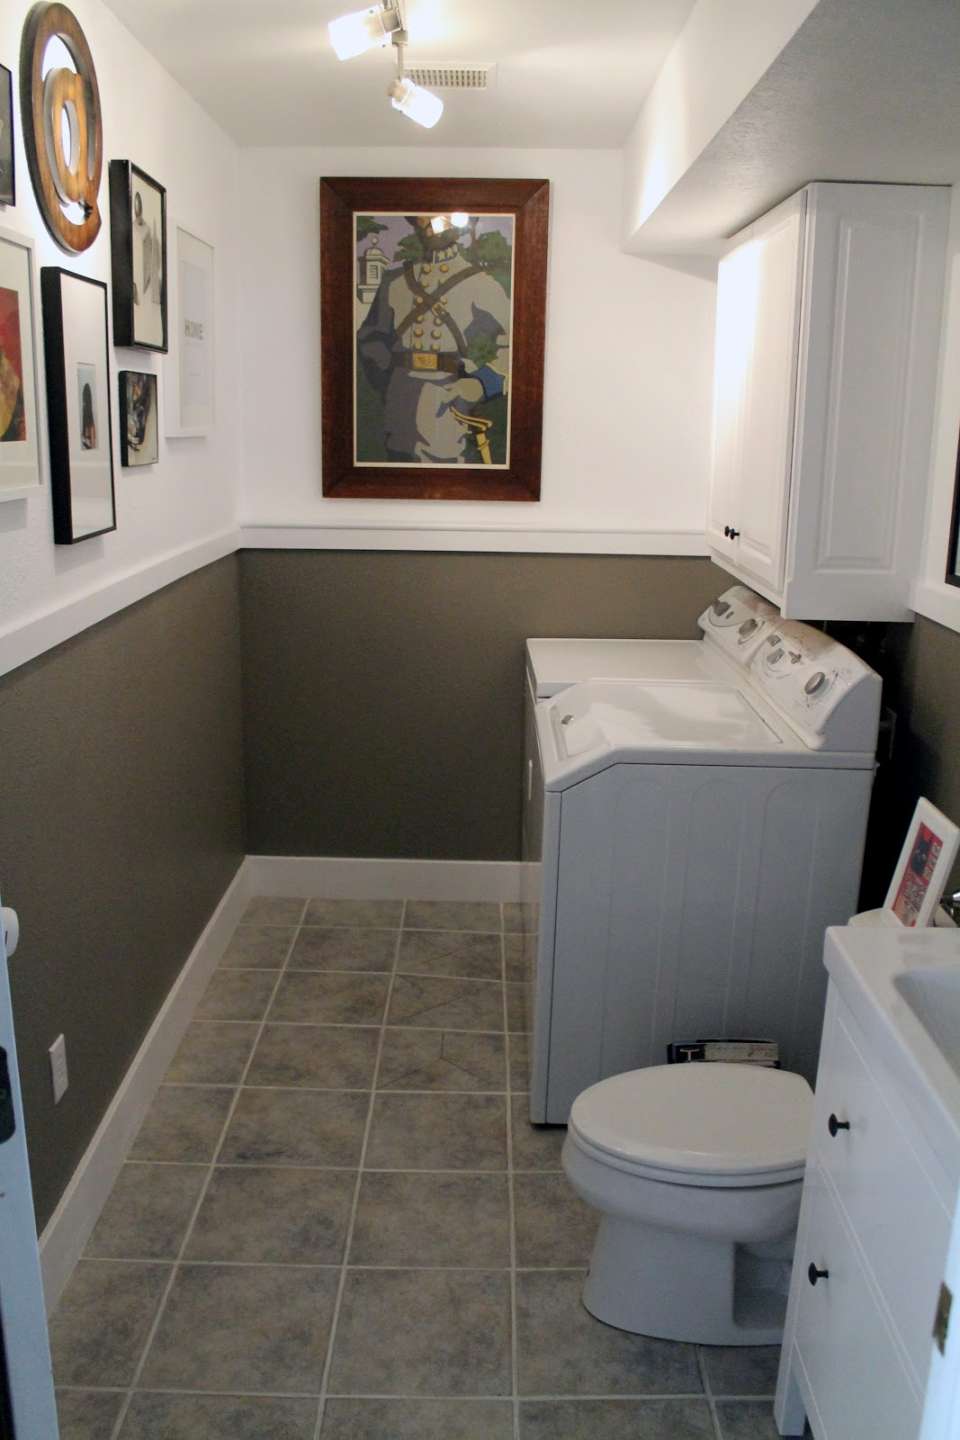 Laundry Room/Half Bath Before and Afters - Chris Loves Julia